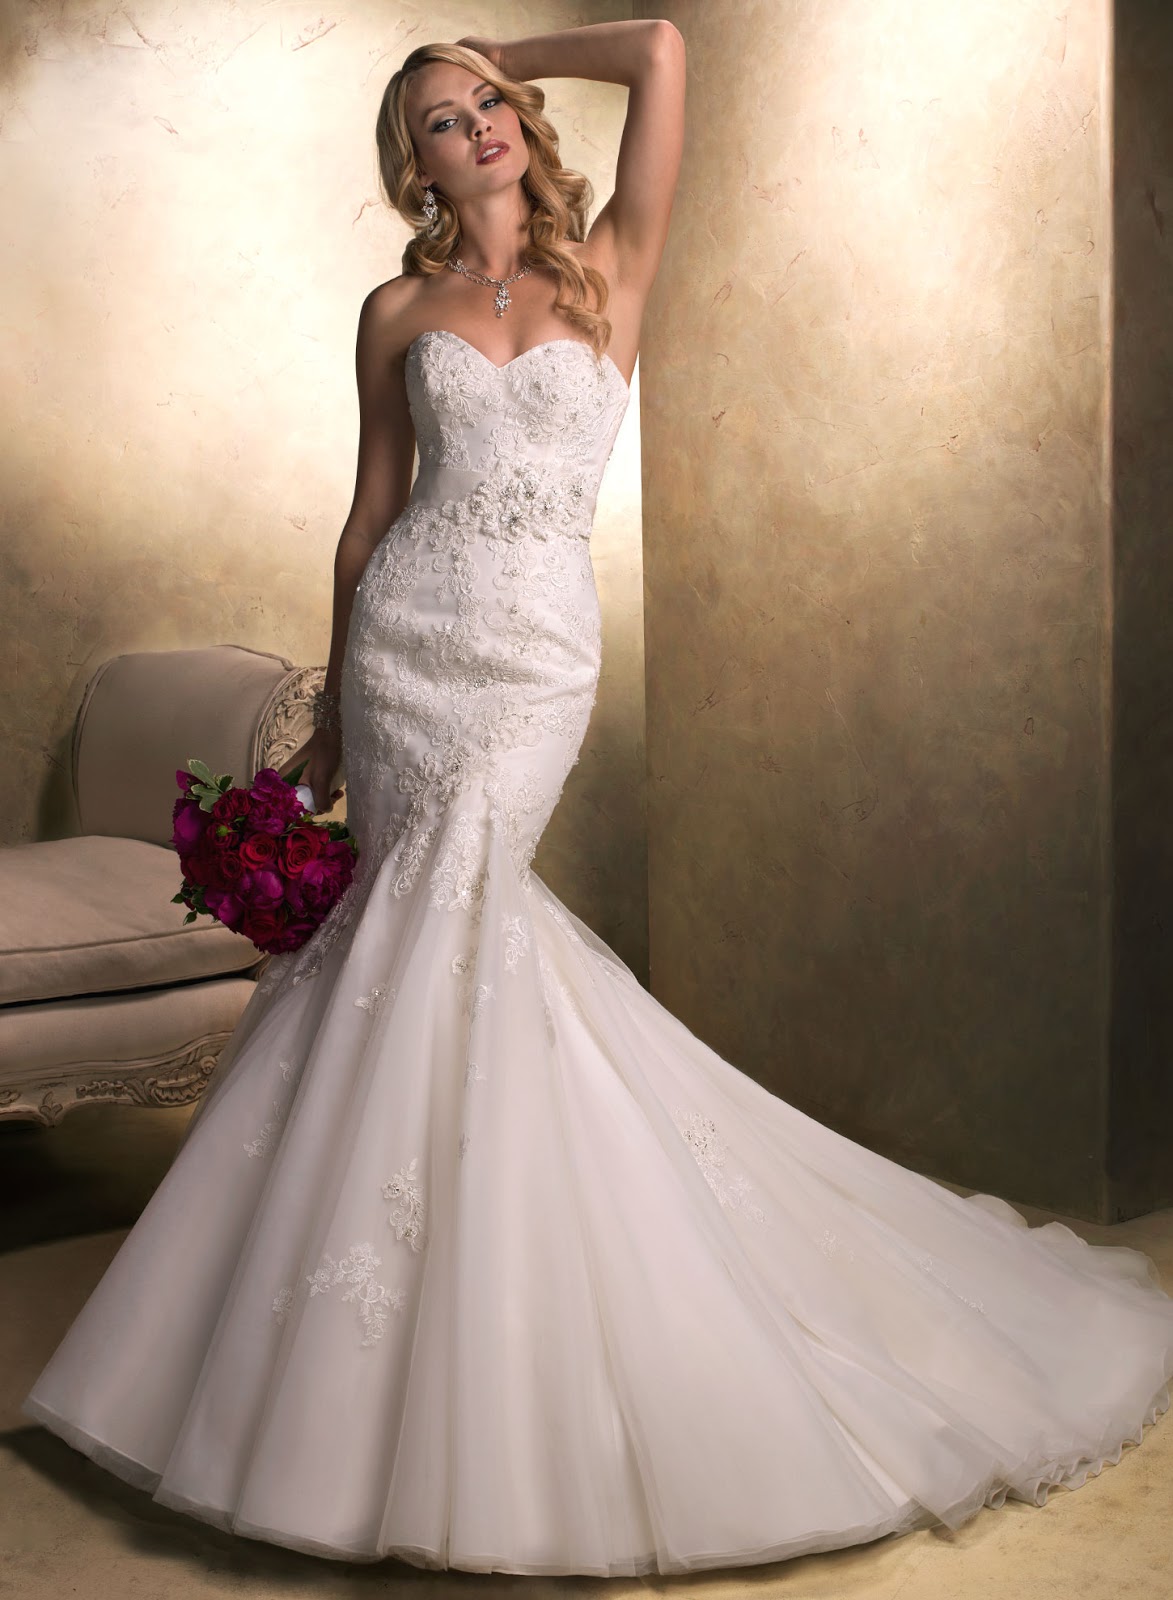 IN LOVE WITH BEAUTY: Maggie Sottero Wedding Dresses - part 1.